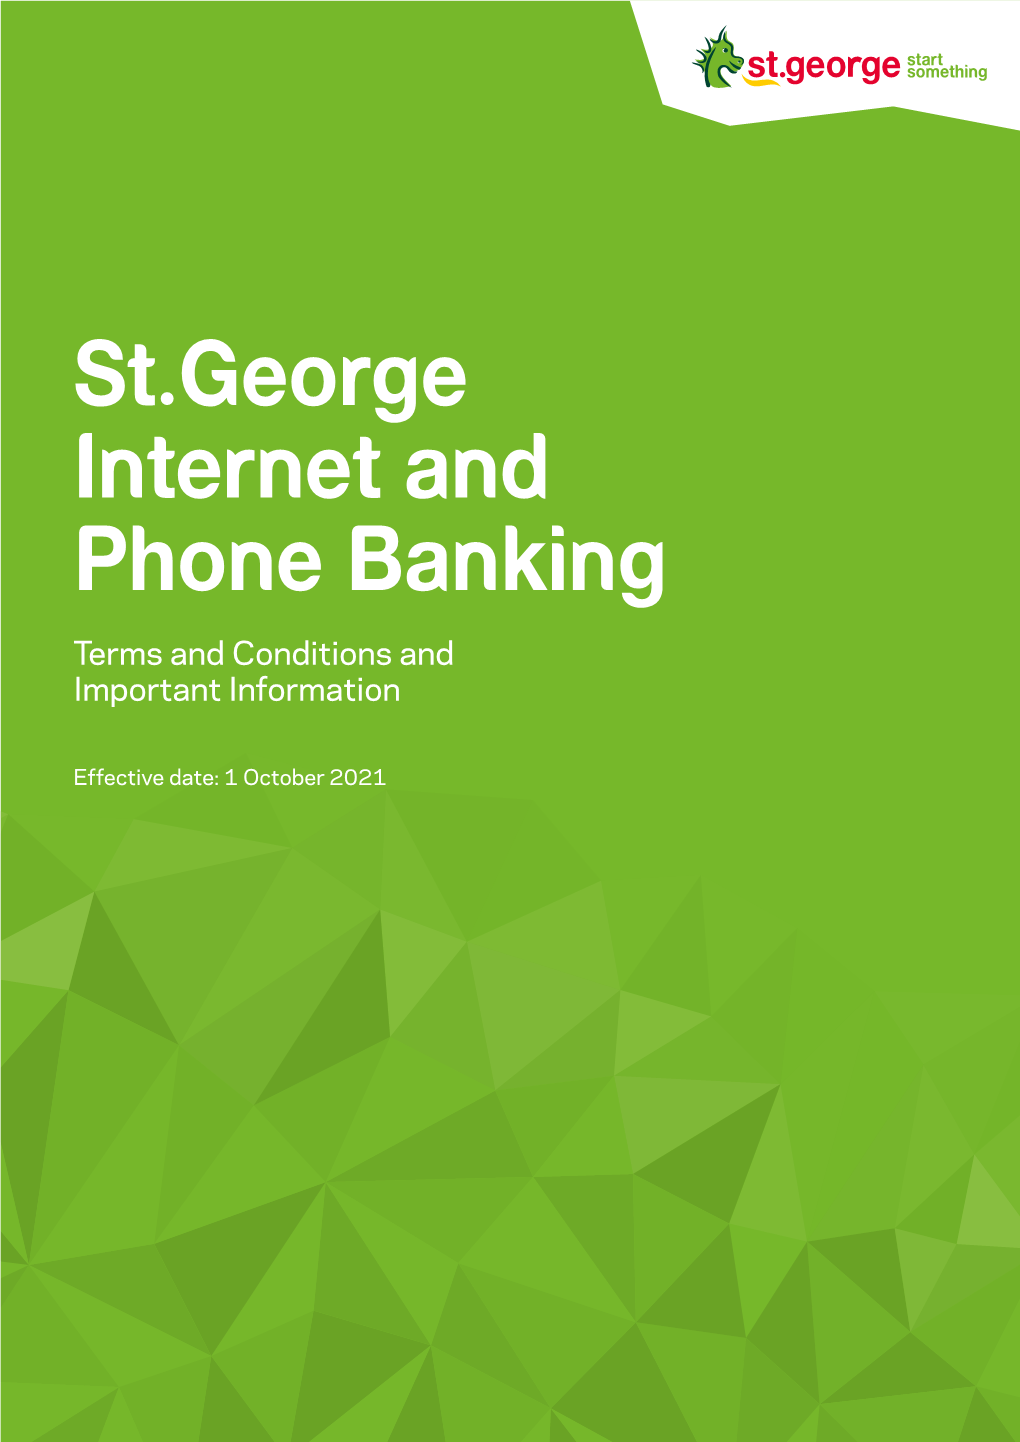 St.George Internet and Phone Banking Terms and Conditions